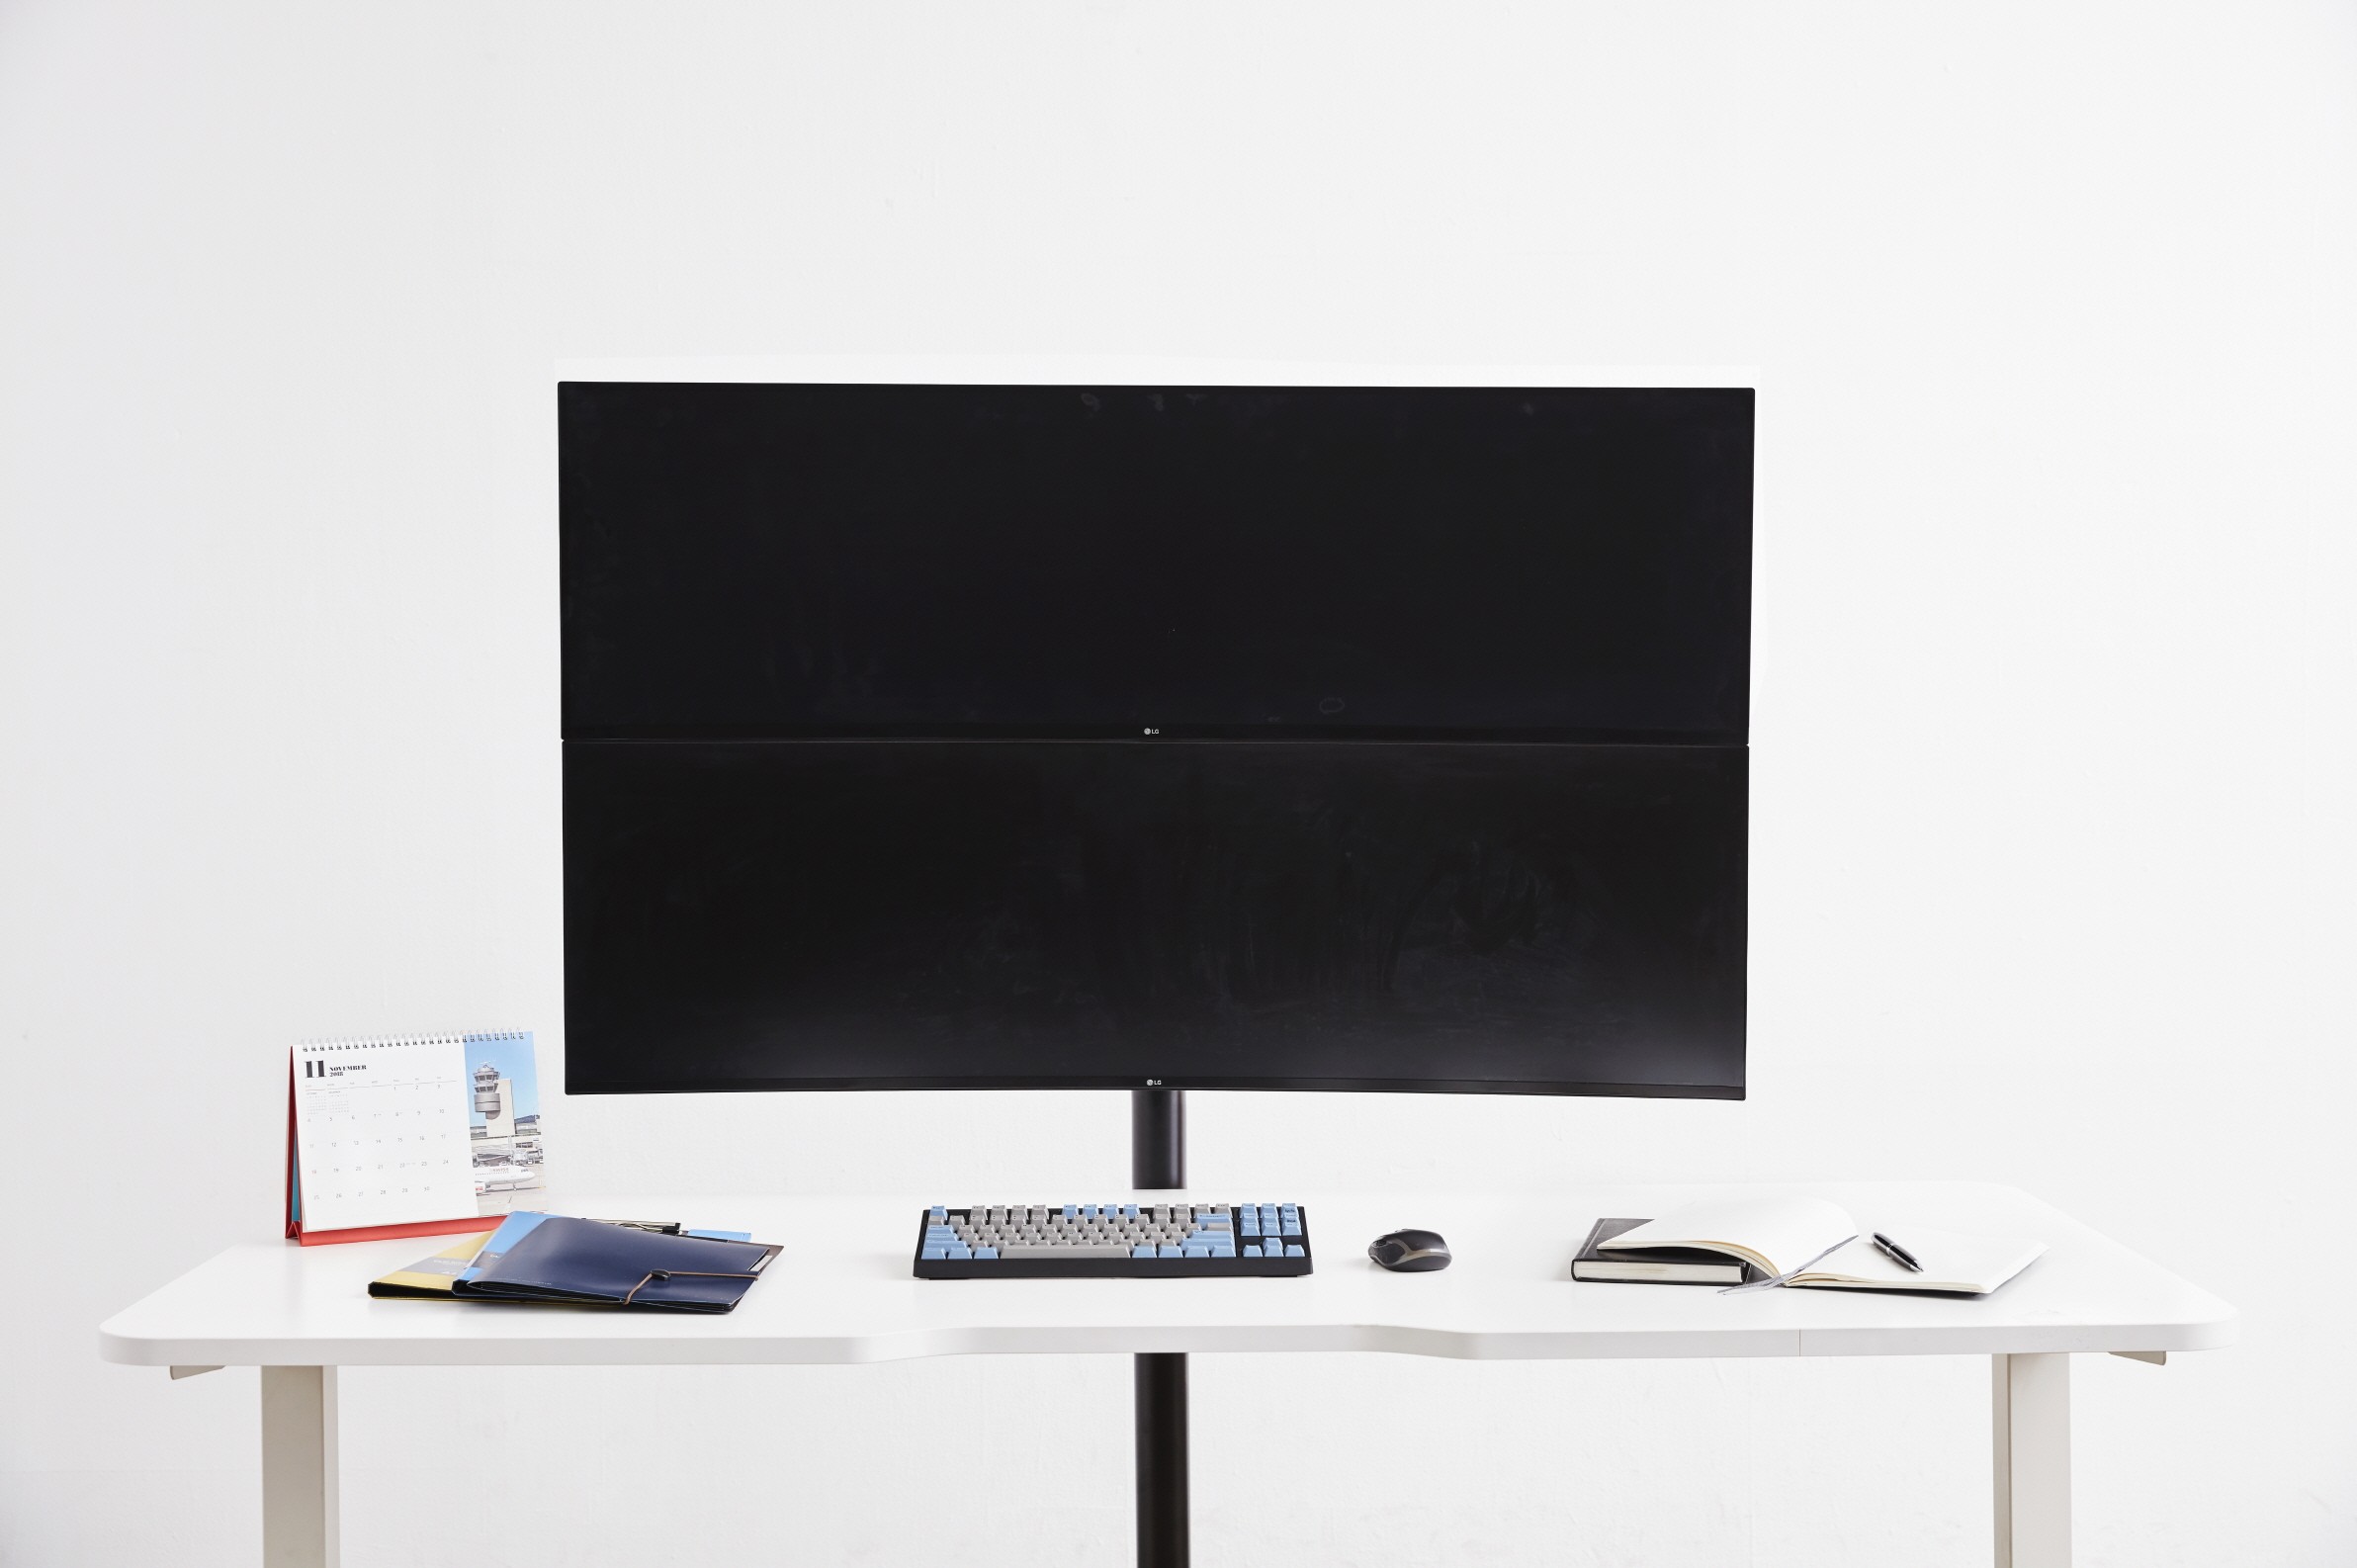 Front view of the LG UltraWide monitor model 49WL95 with office supplies sitting on a desk